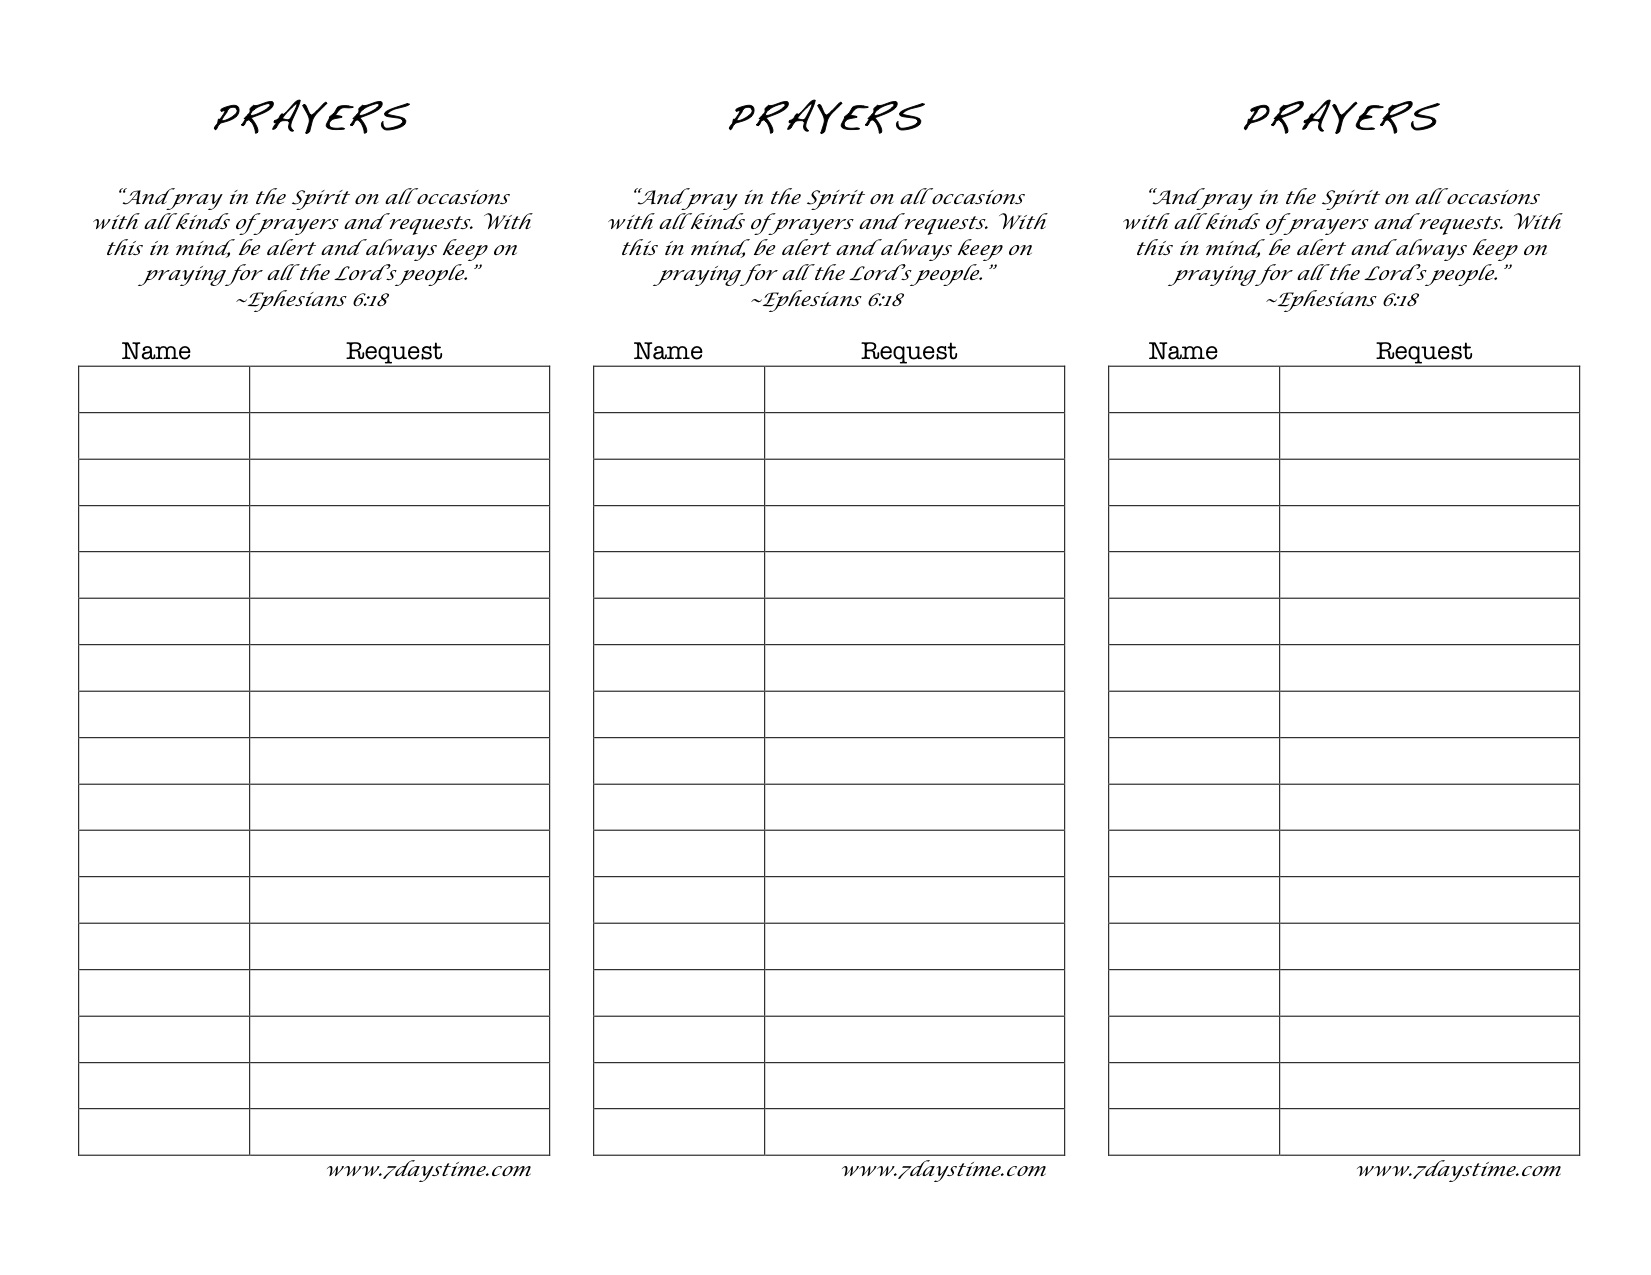 Prayer List Template   8+ Free Word, Excel, PDF Format Download 